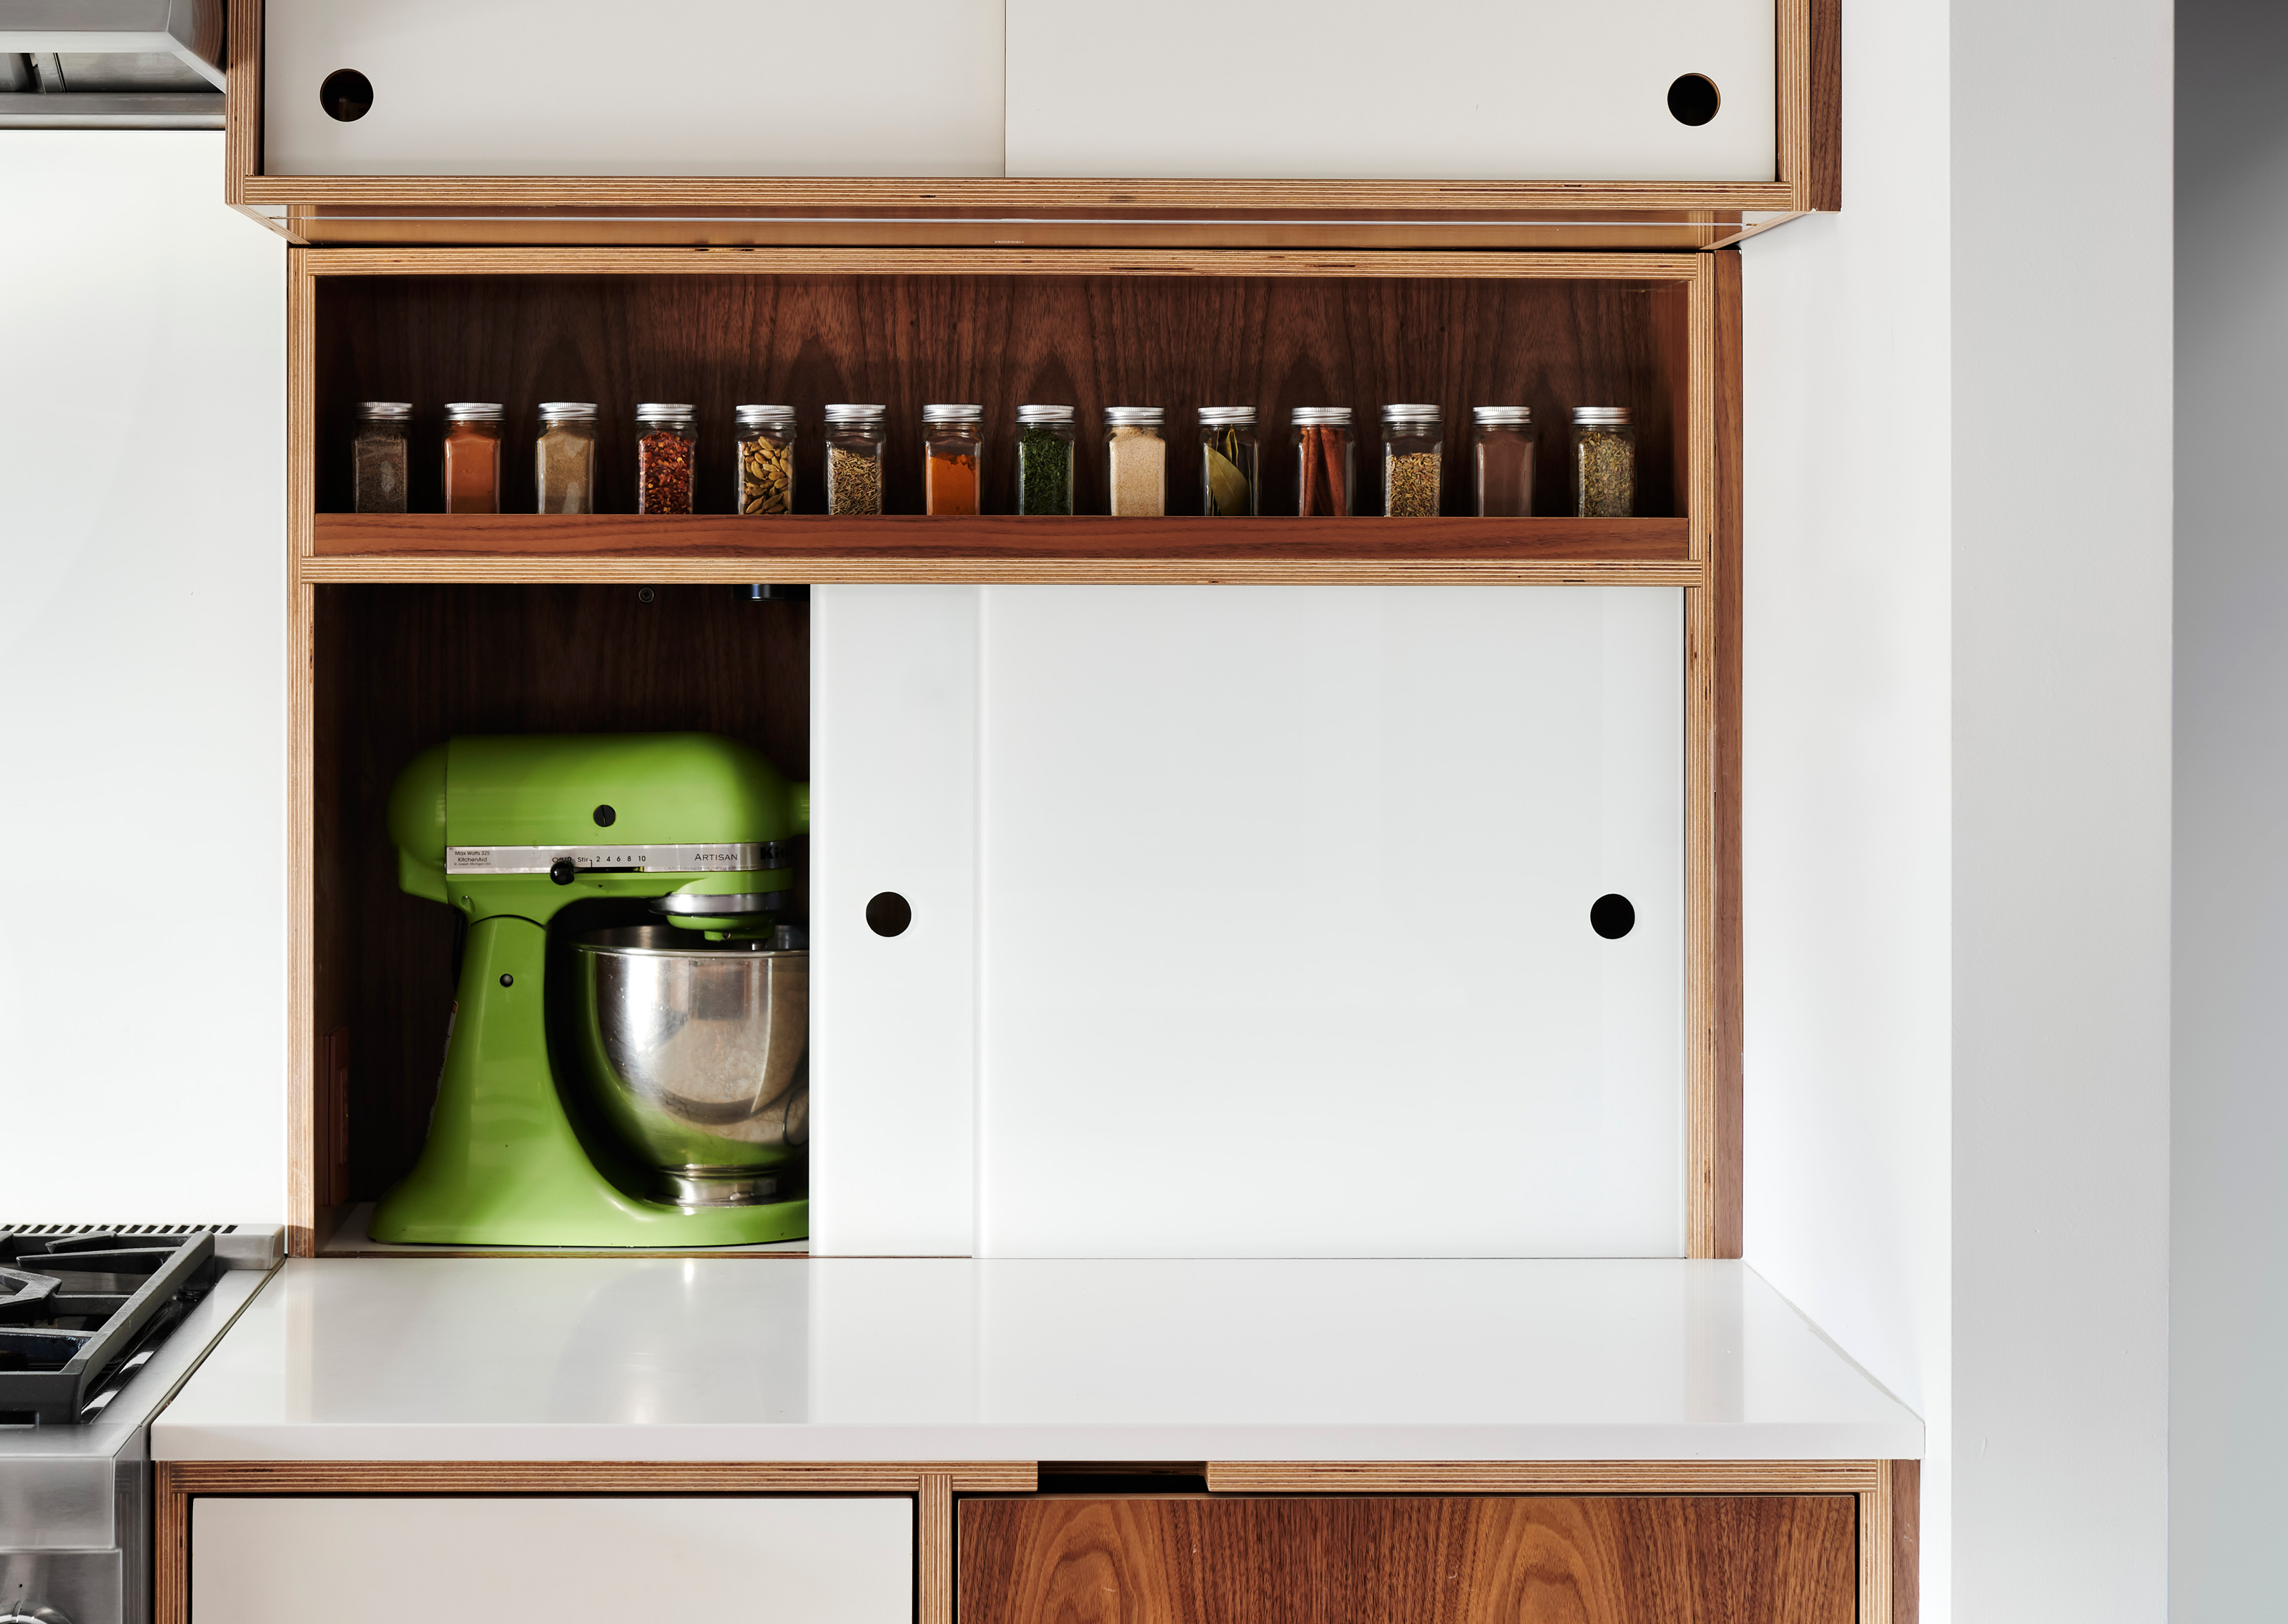 Appliance garages - meet the solution to countertop clutter